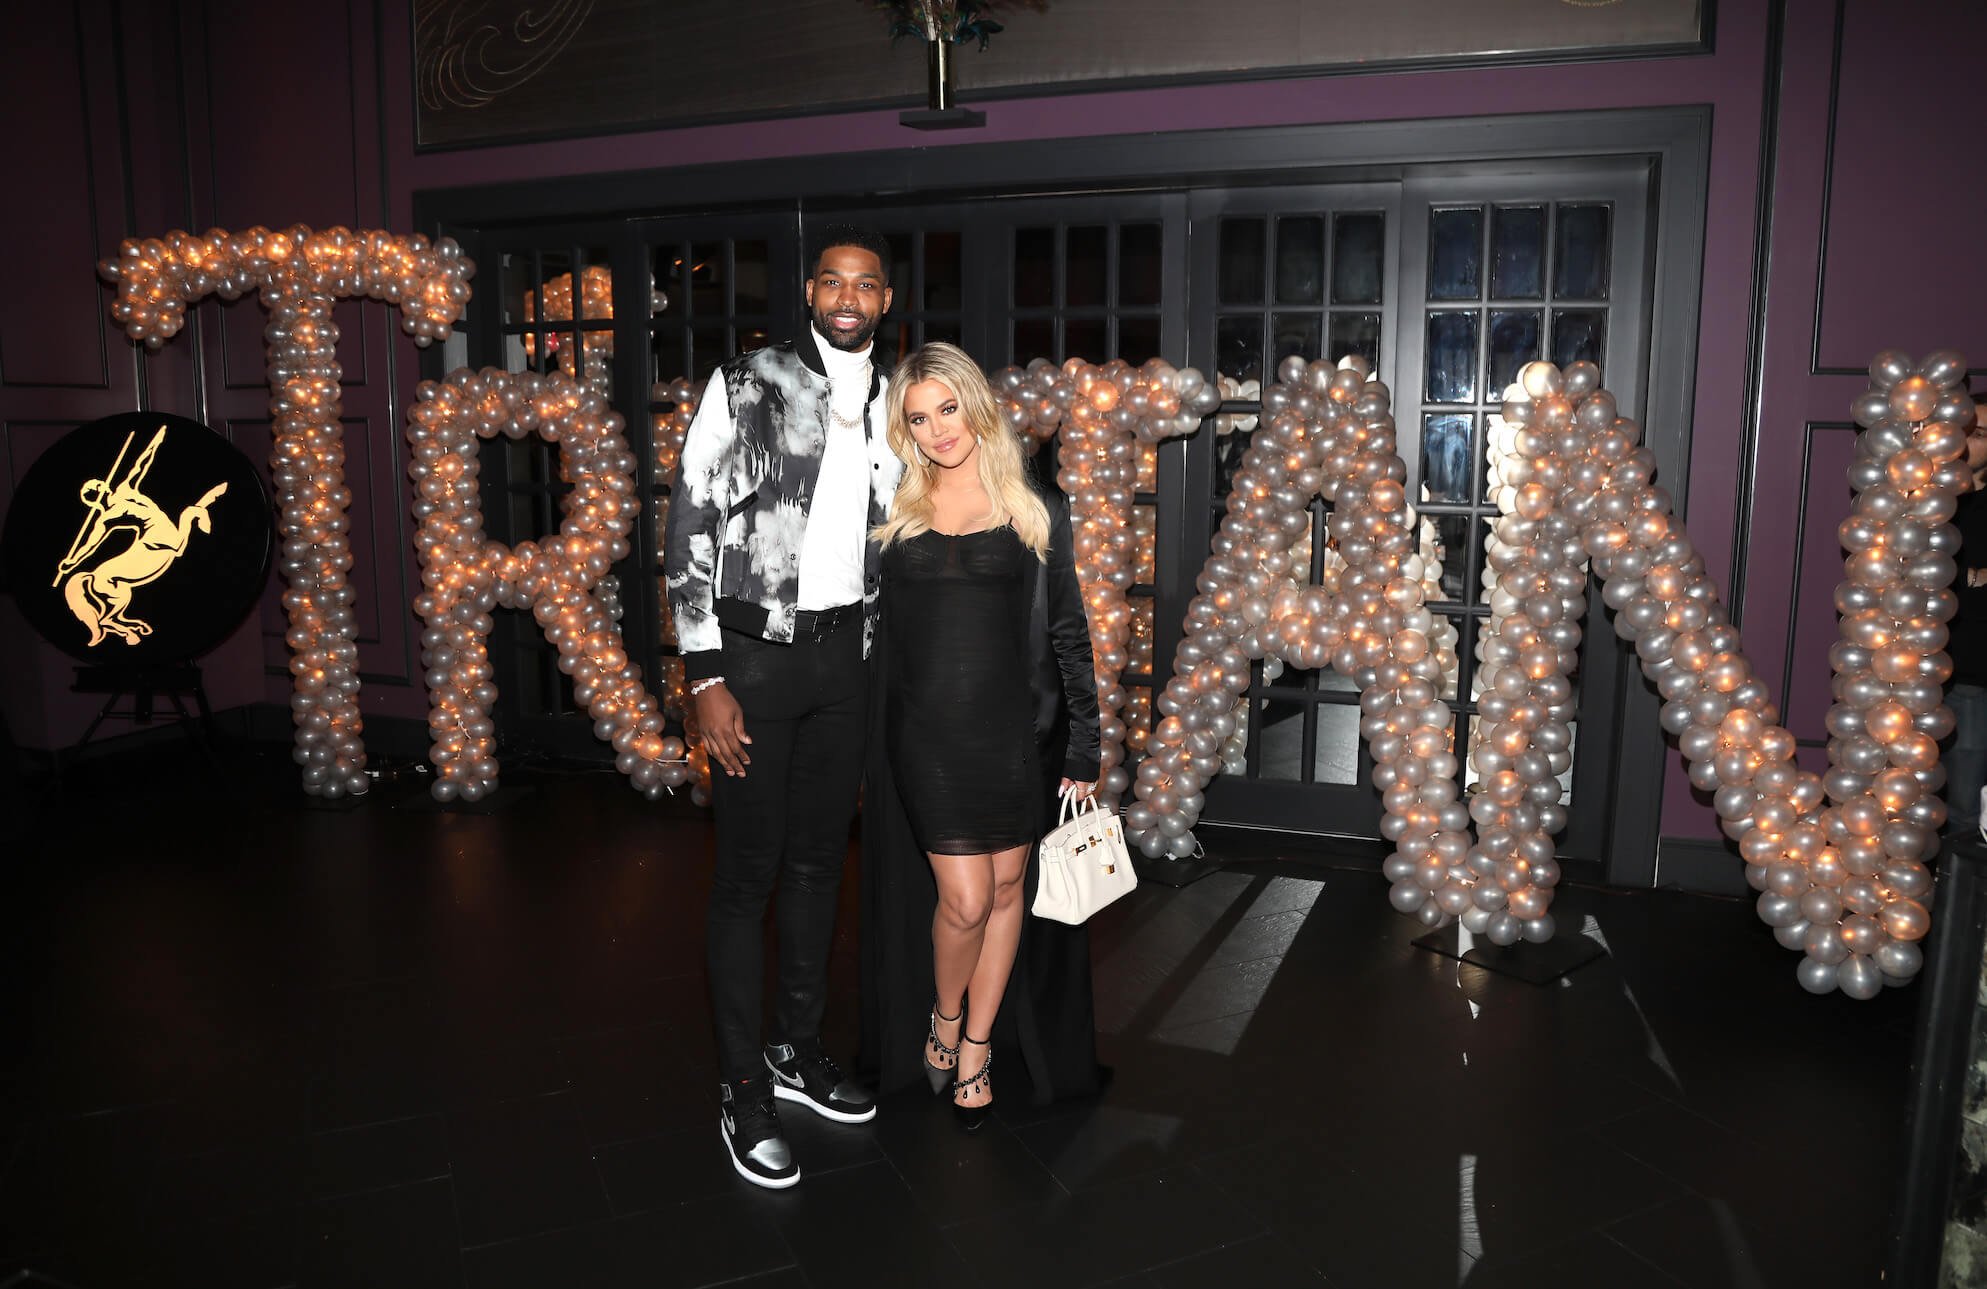 Khloé Kardashian and Tristan Thompson standing in front of a large "Tristan" sign outdoors